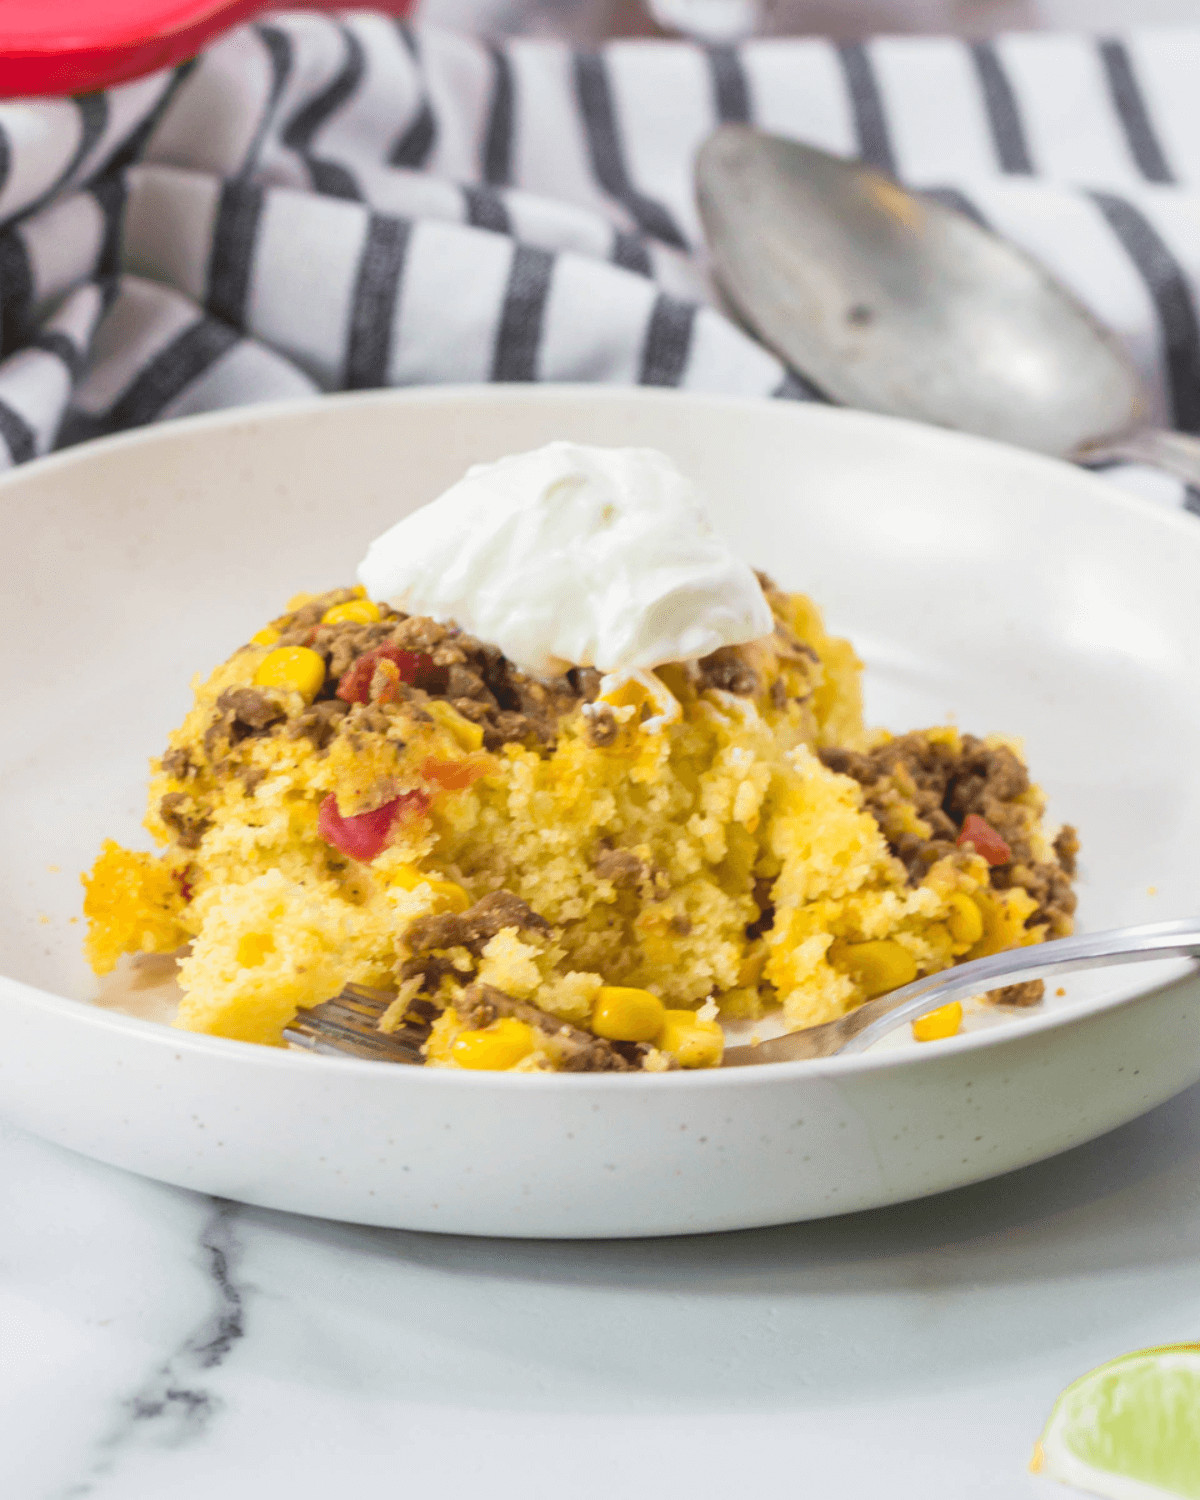 A bowl of Cowboy Cornbread Casserole with mixed vegetables, ground meat, and a dollop of sour cream, accompanied by a spoon on a striped cloth background.